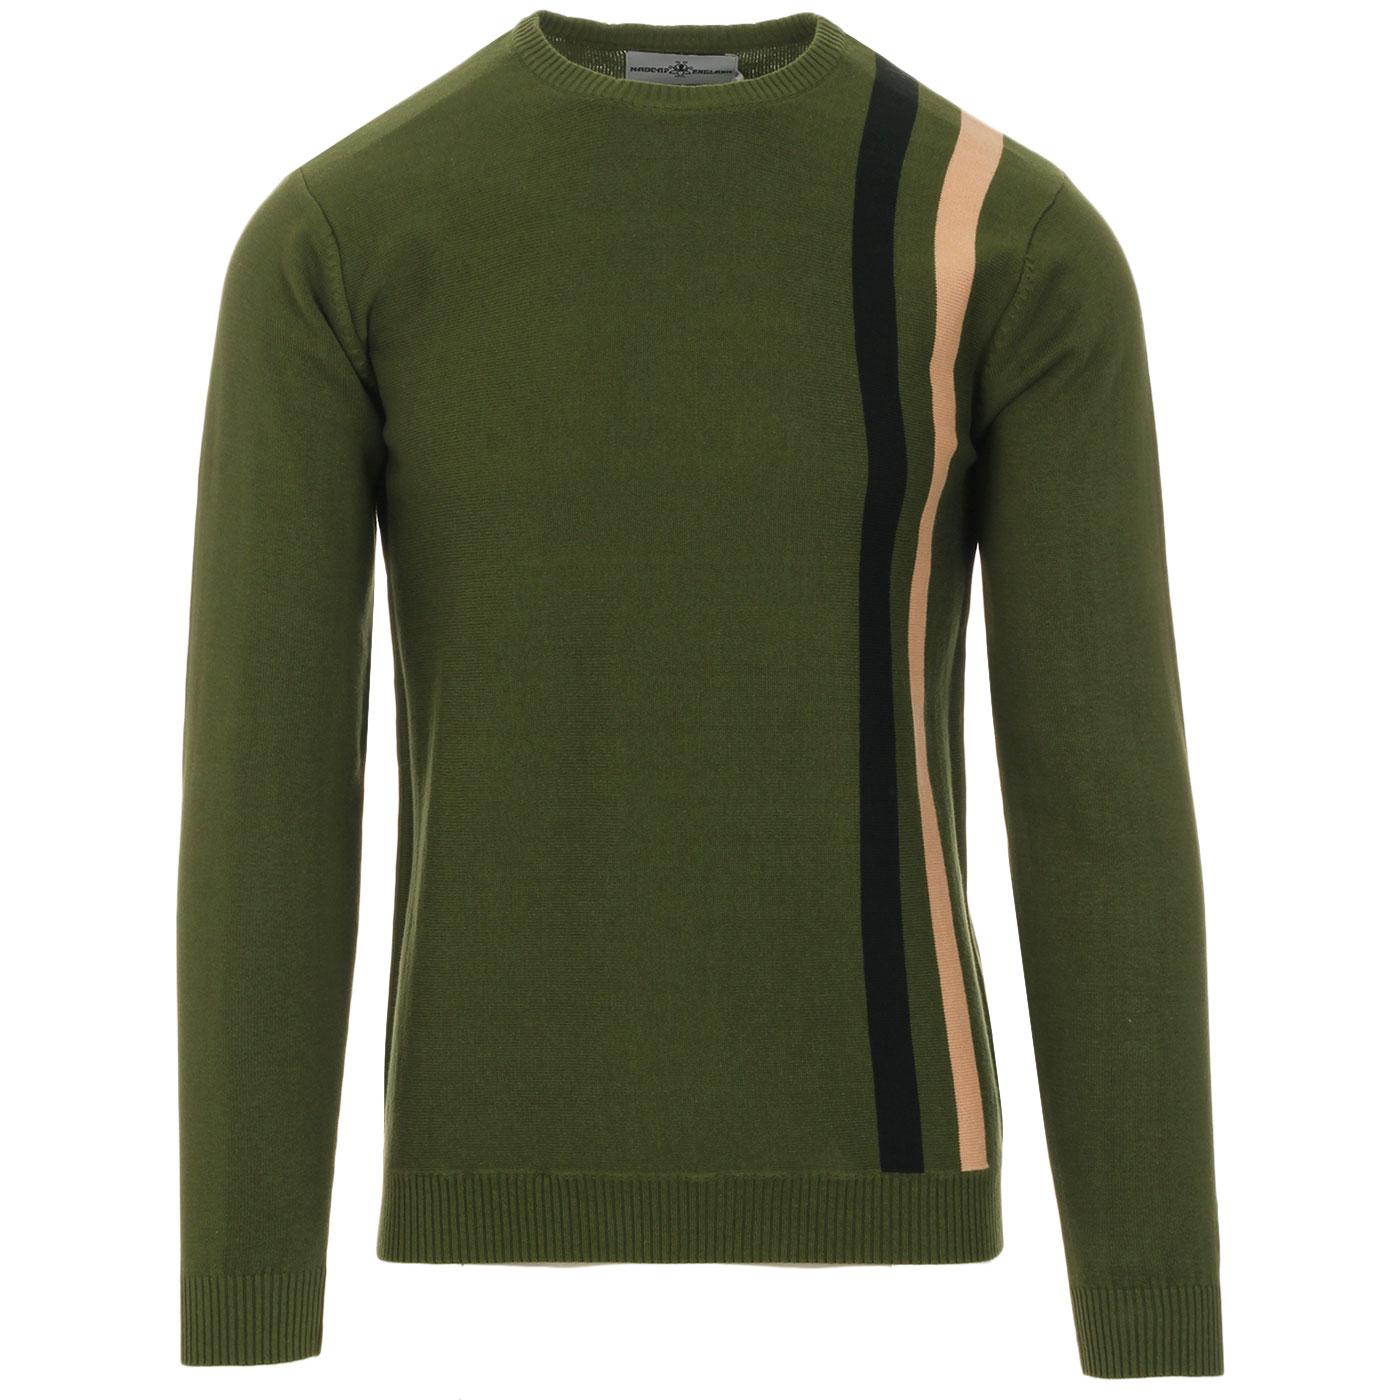 Madcap England Action 1960s Mod Racing Jumper with Toasted Almond and Black Retro Stripes